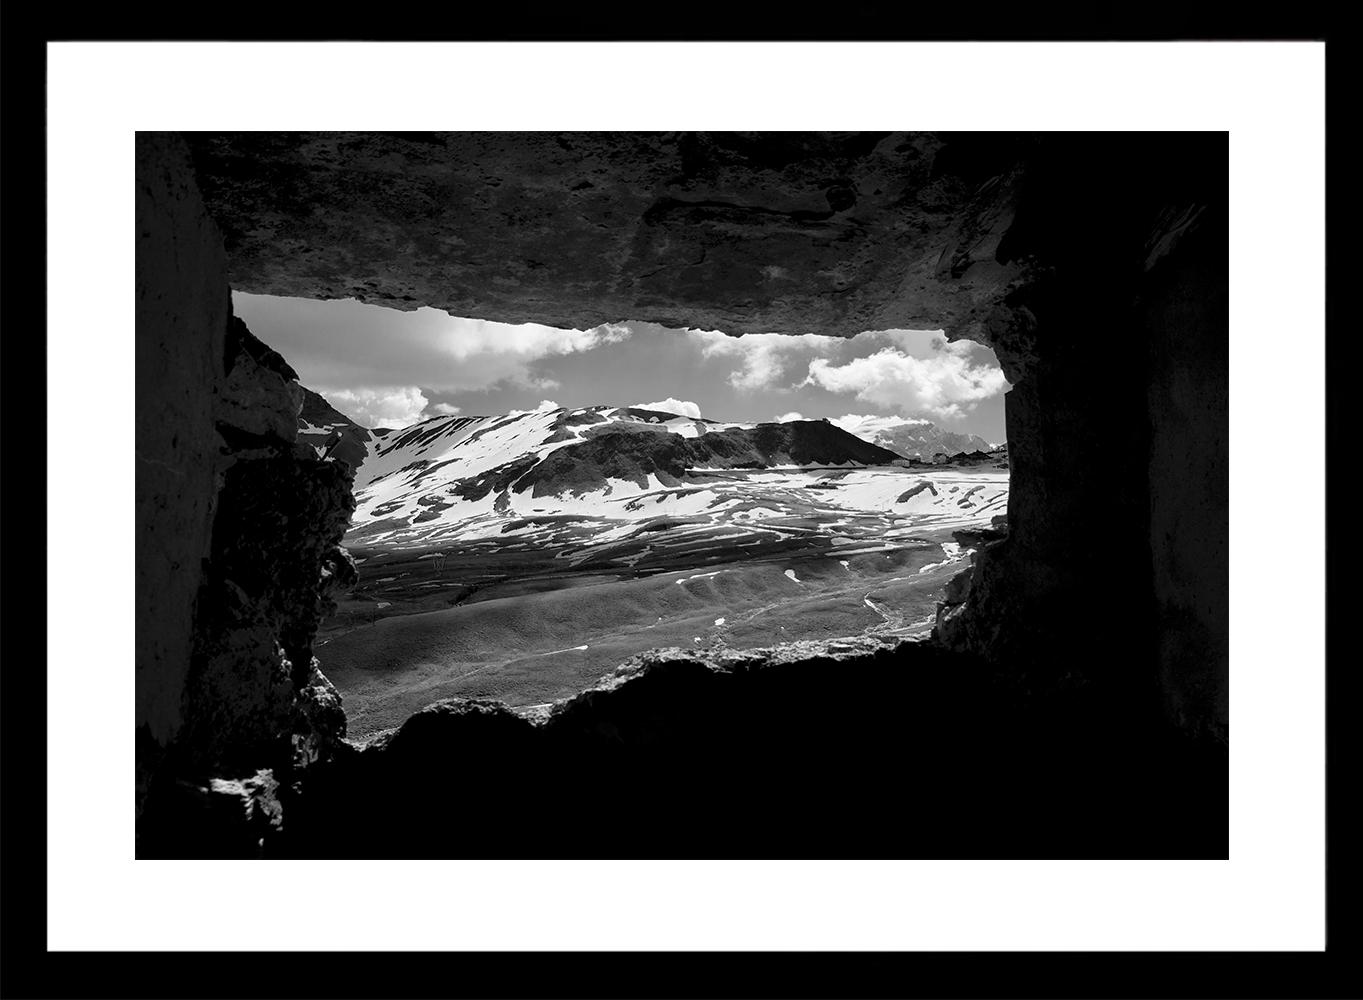 Luca Artioli Black and White Photograph - A Fatal Pass, The Window on the enemy. Black and White landscape Photograph